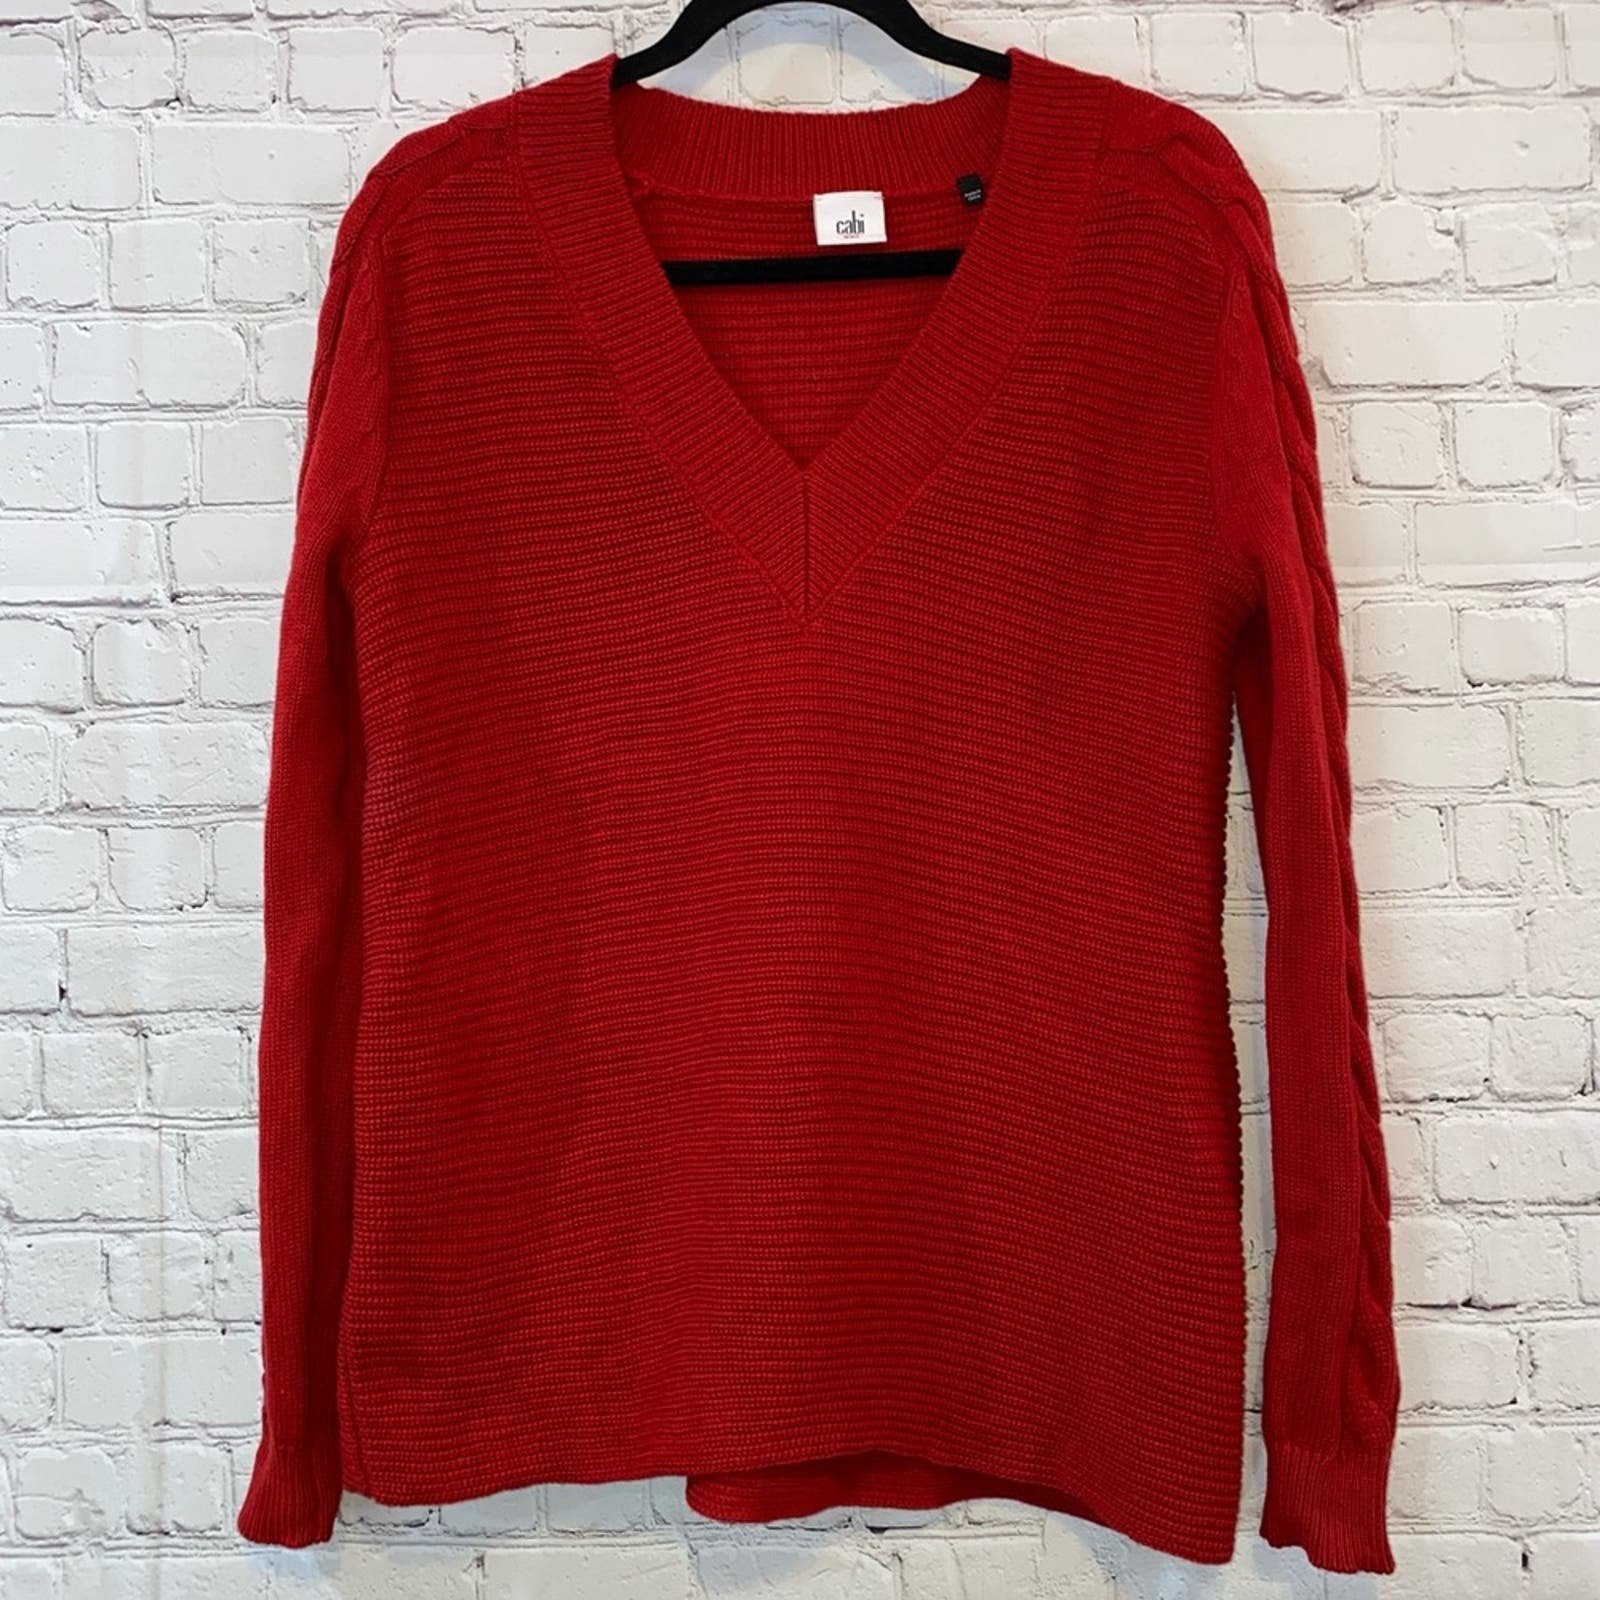 Popular Cabi Red Standout Pullover Cable Knit Ribbed Co